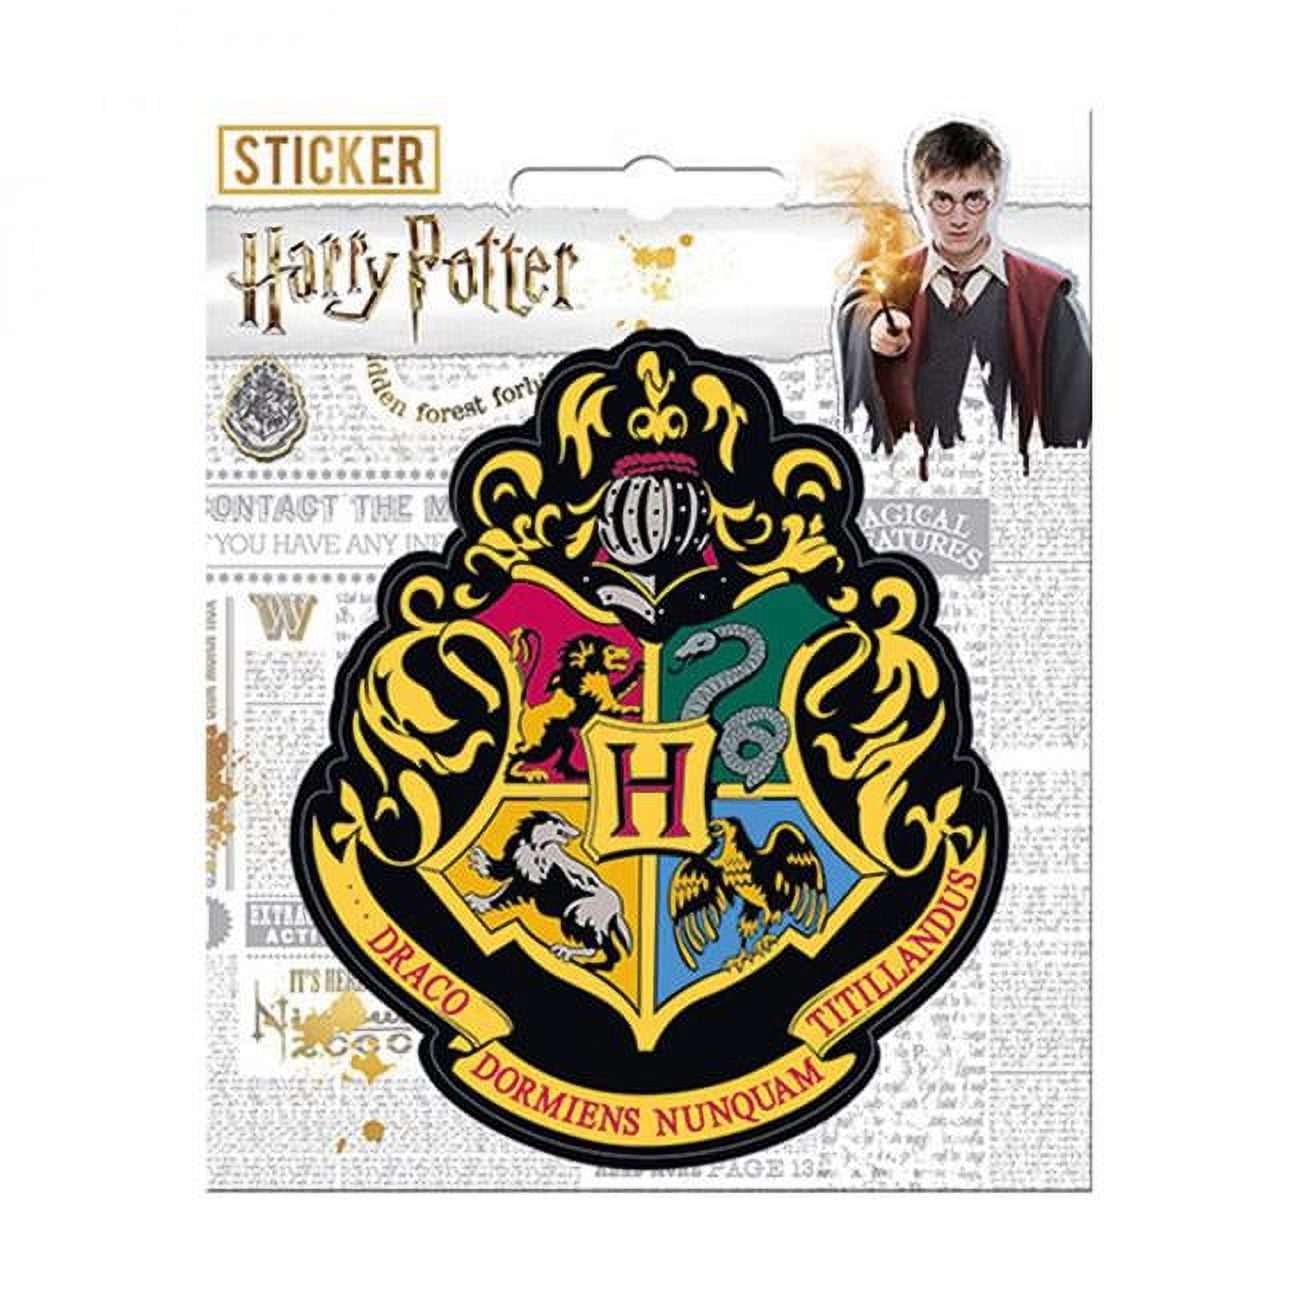 Hogwarts Theme Harry potter scrapbook personalised with photos – Kreate